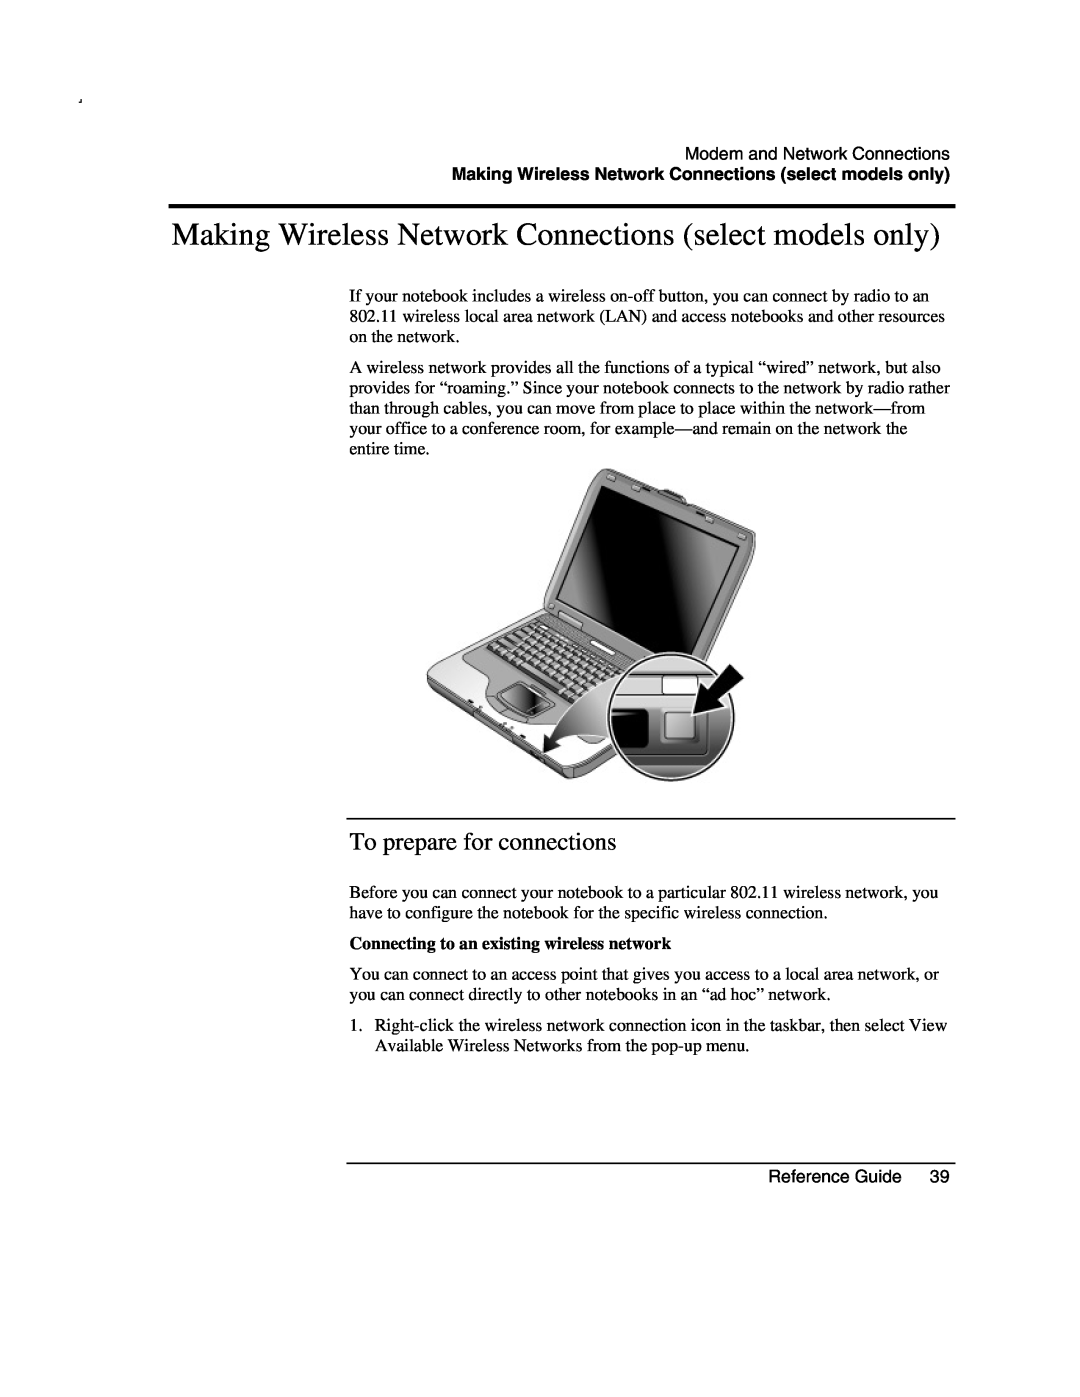 Compaq AMC20493-KT5 manual Making Wireless Network Connections select models only, To prepare for connections 